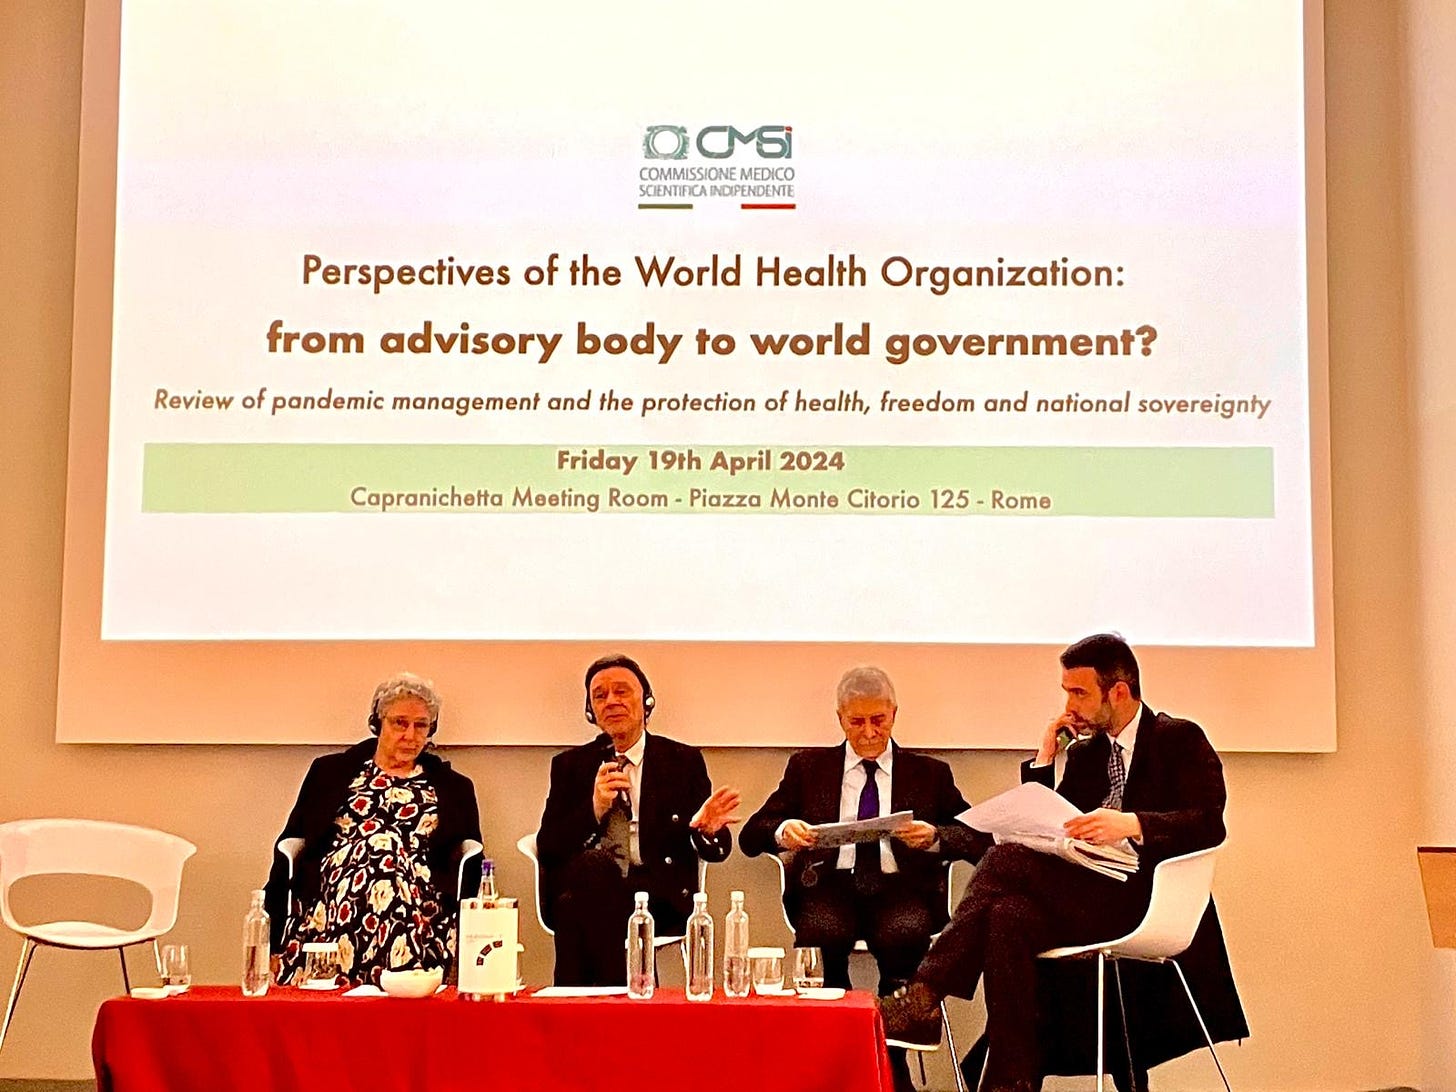 20 hours in Rome challenging the WHO and the ‘official’ covid narrative